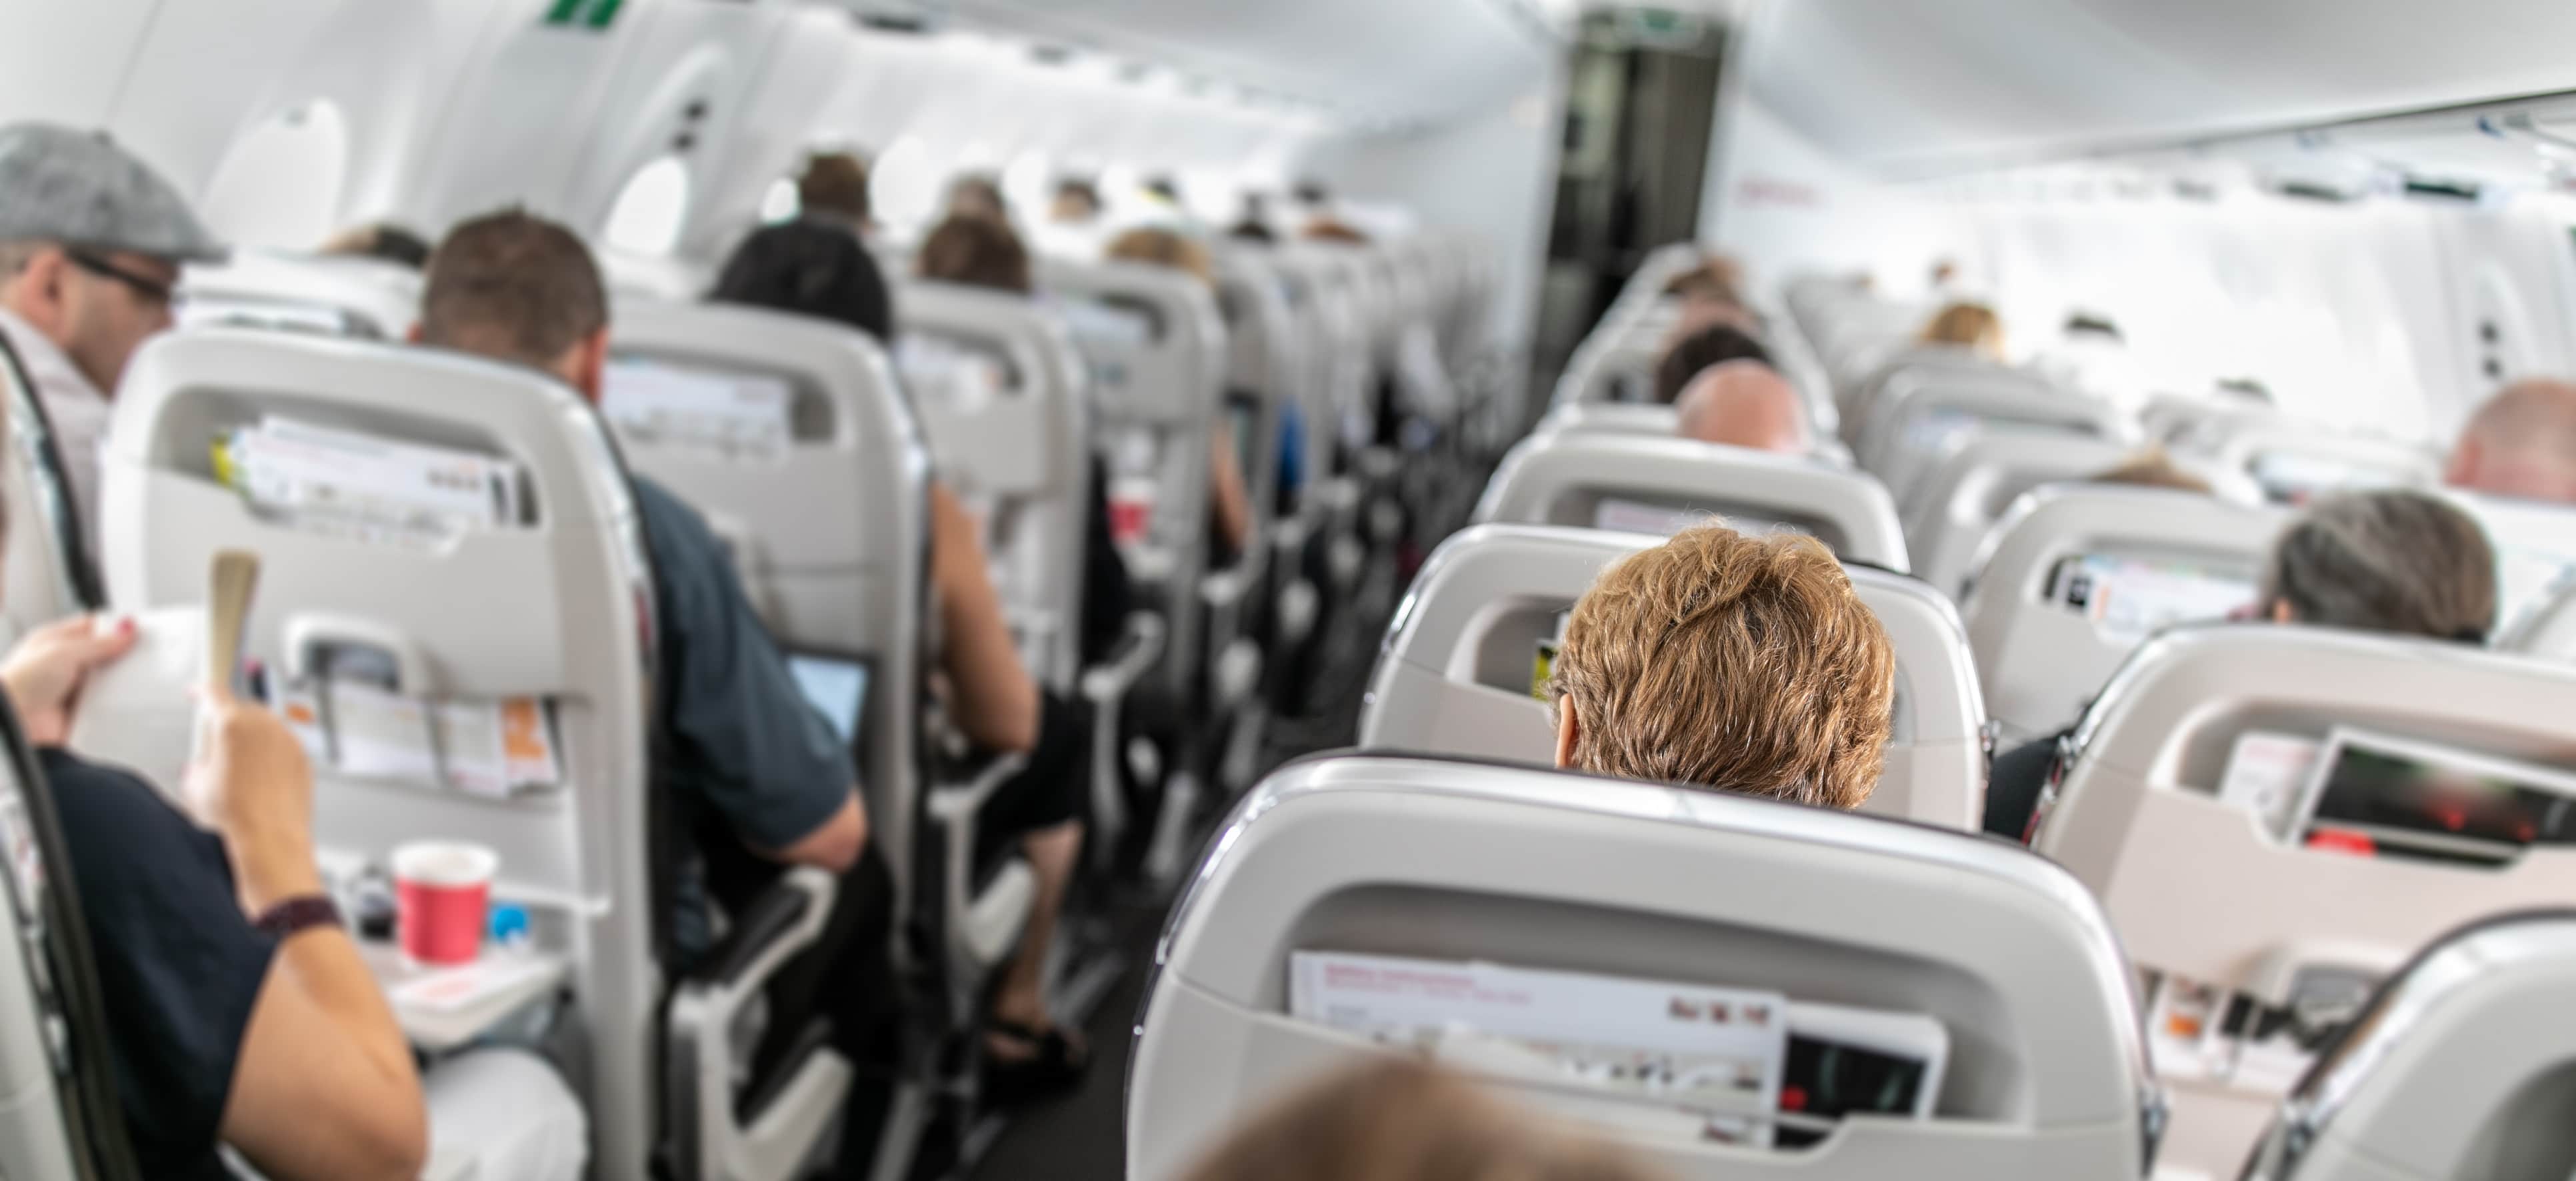 Not All “Accidents” Are Created Equal: Airline Not Liable to Passenger Injured on International Flight